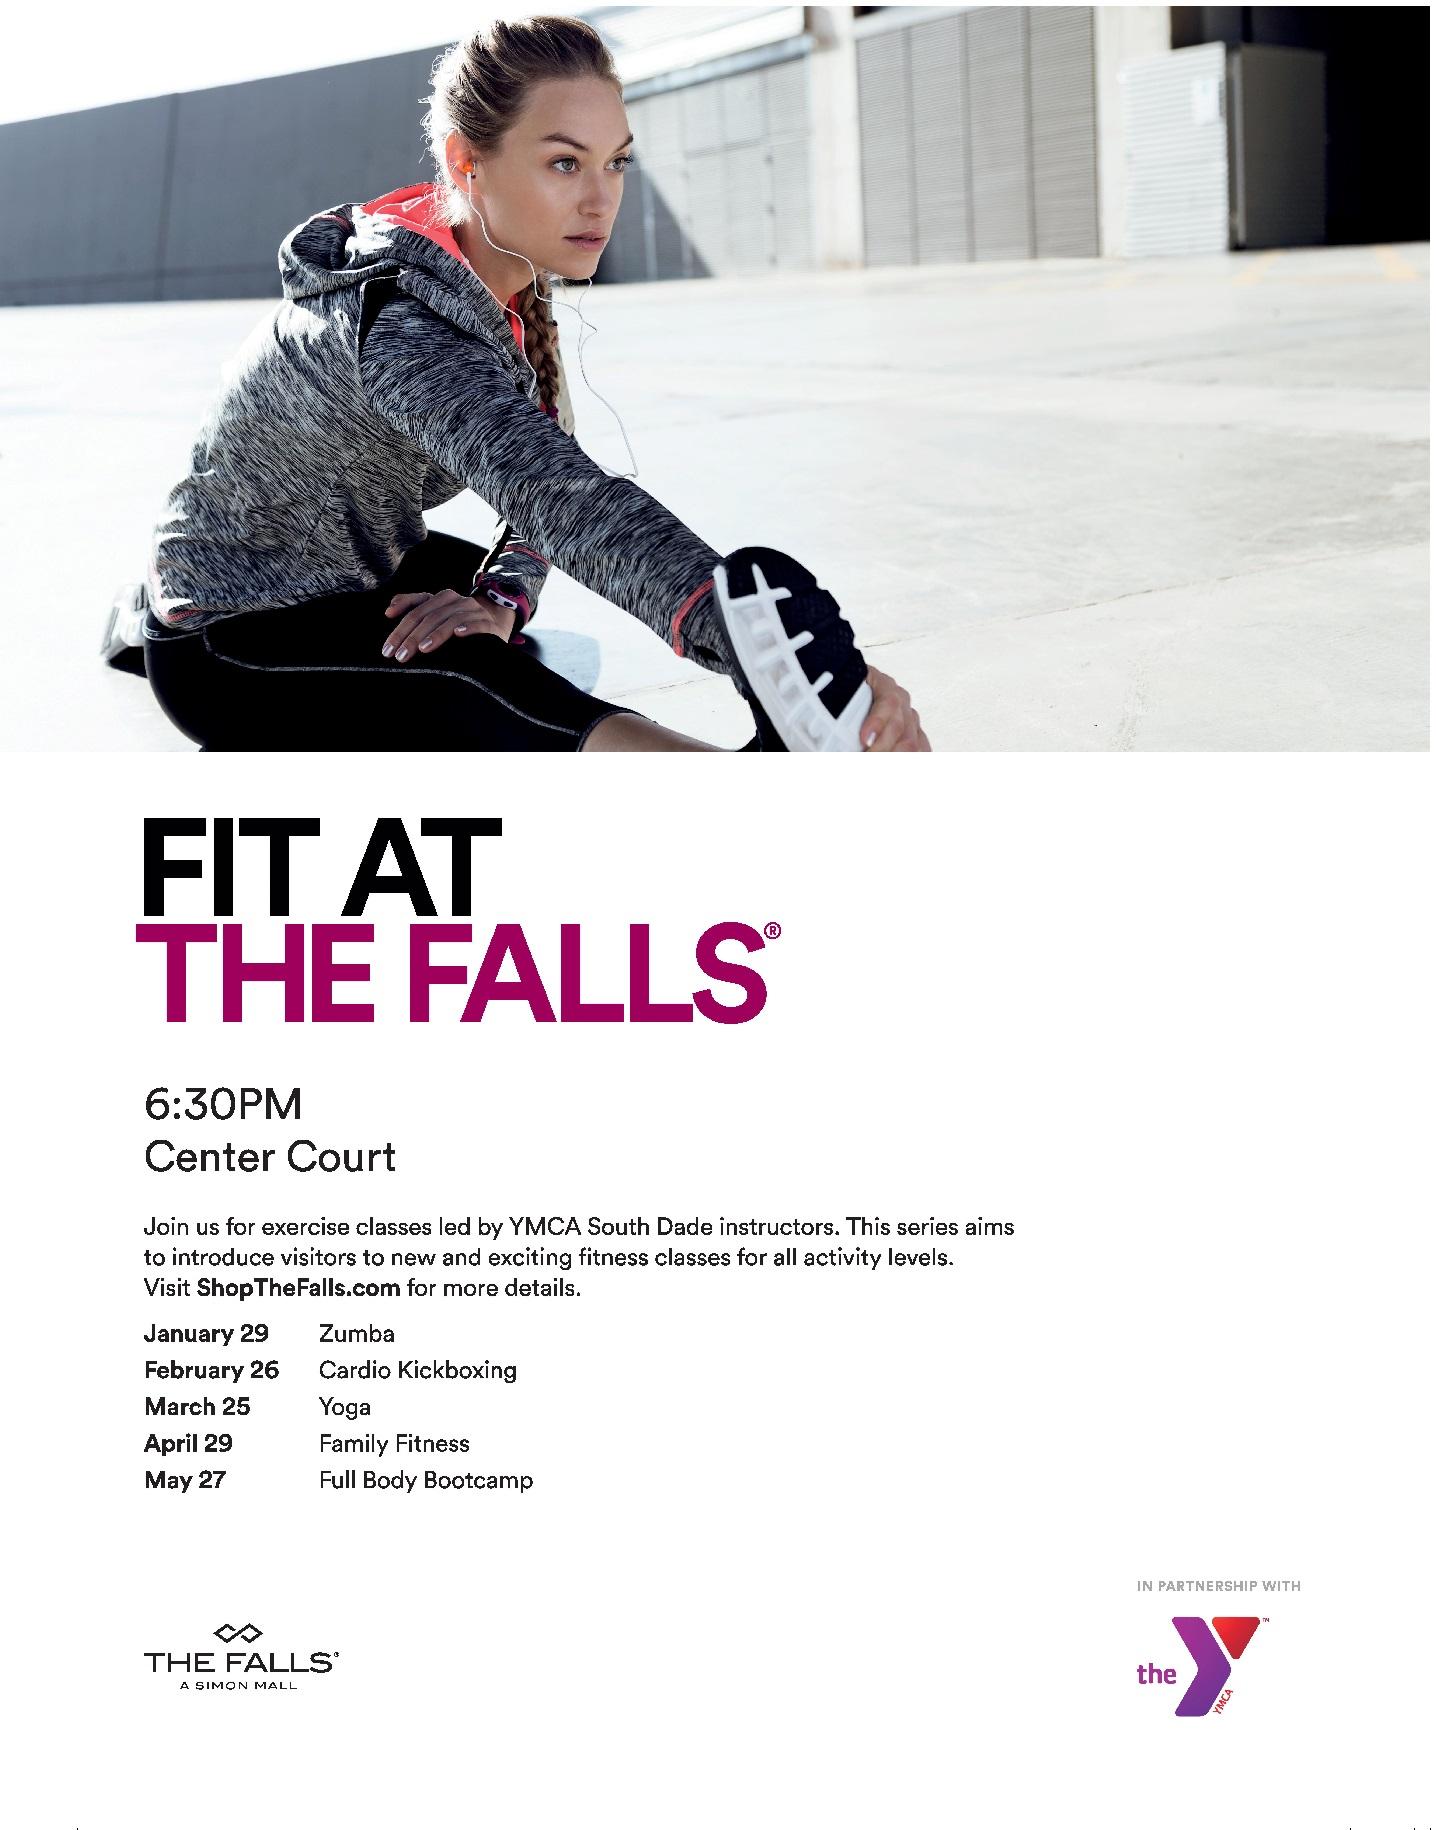 Fit at The Falls with YMCA South Dade